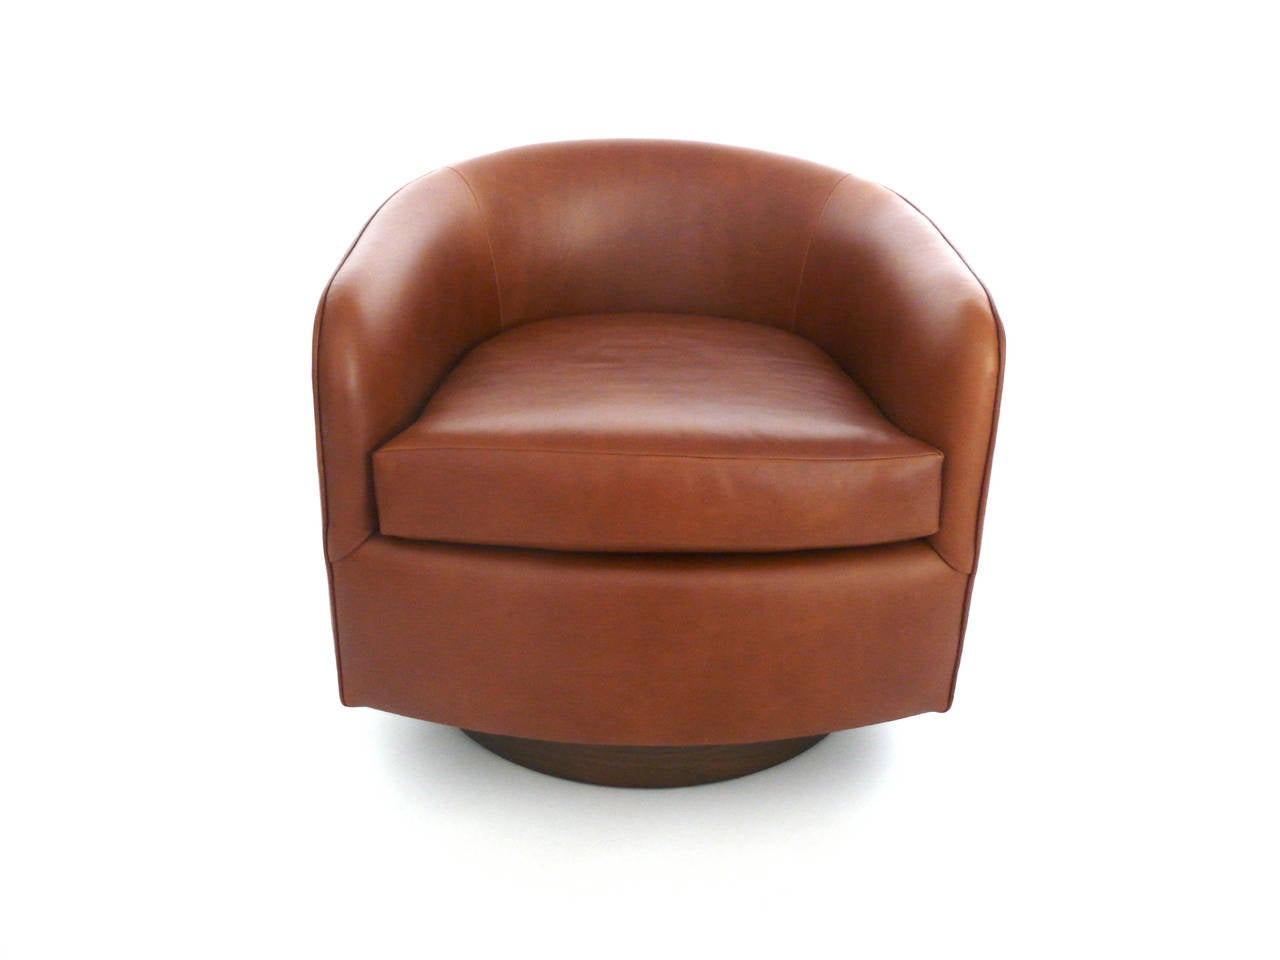 American Saddle Leather Swivel Chairs in the Style of Milo Baughman